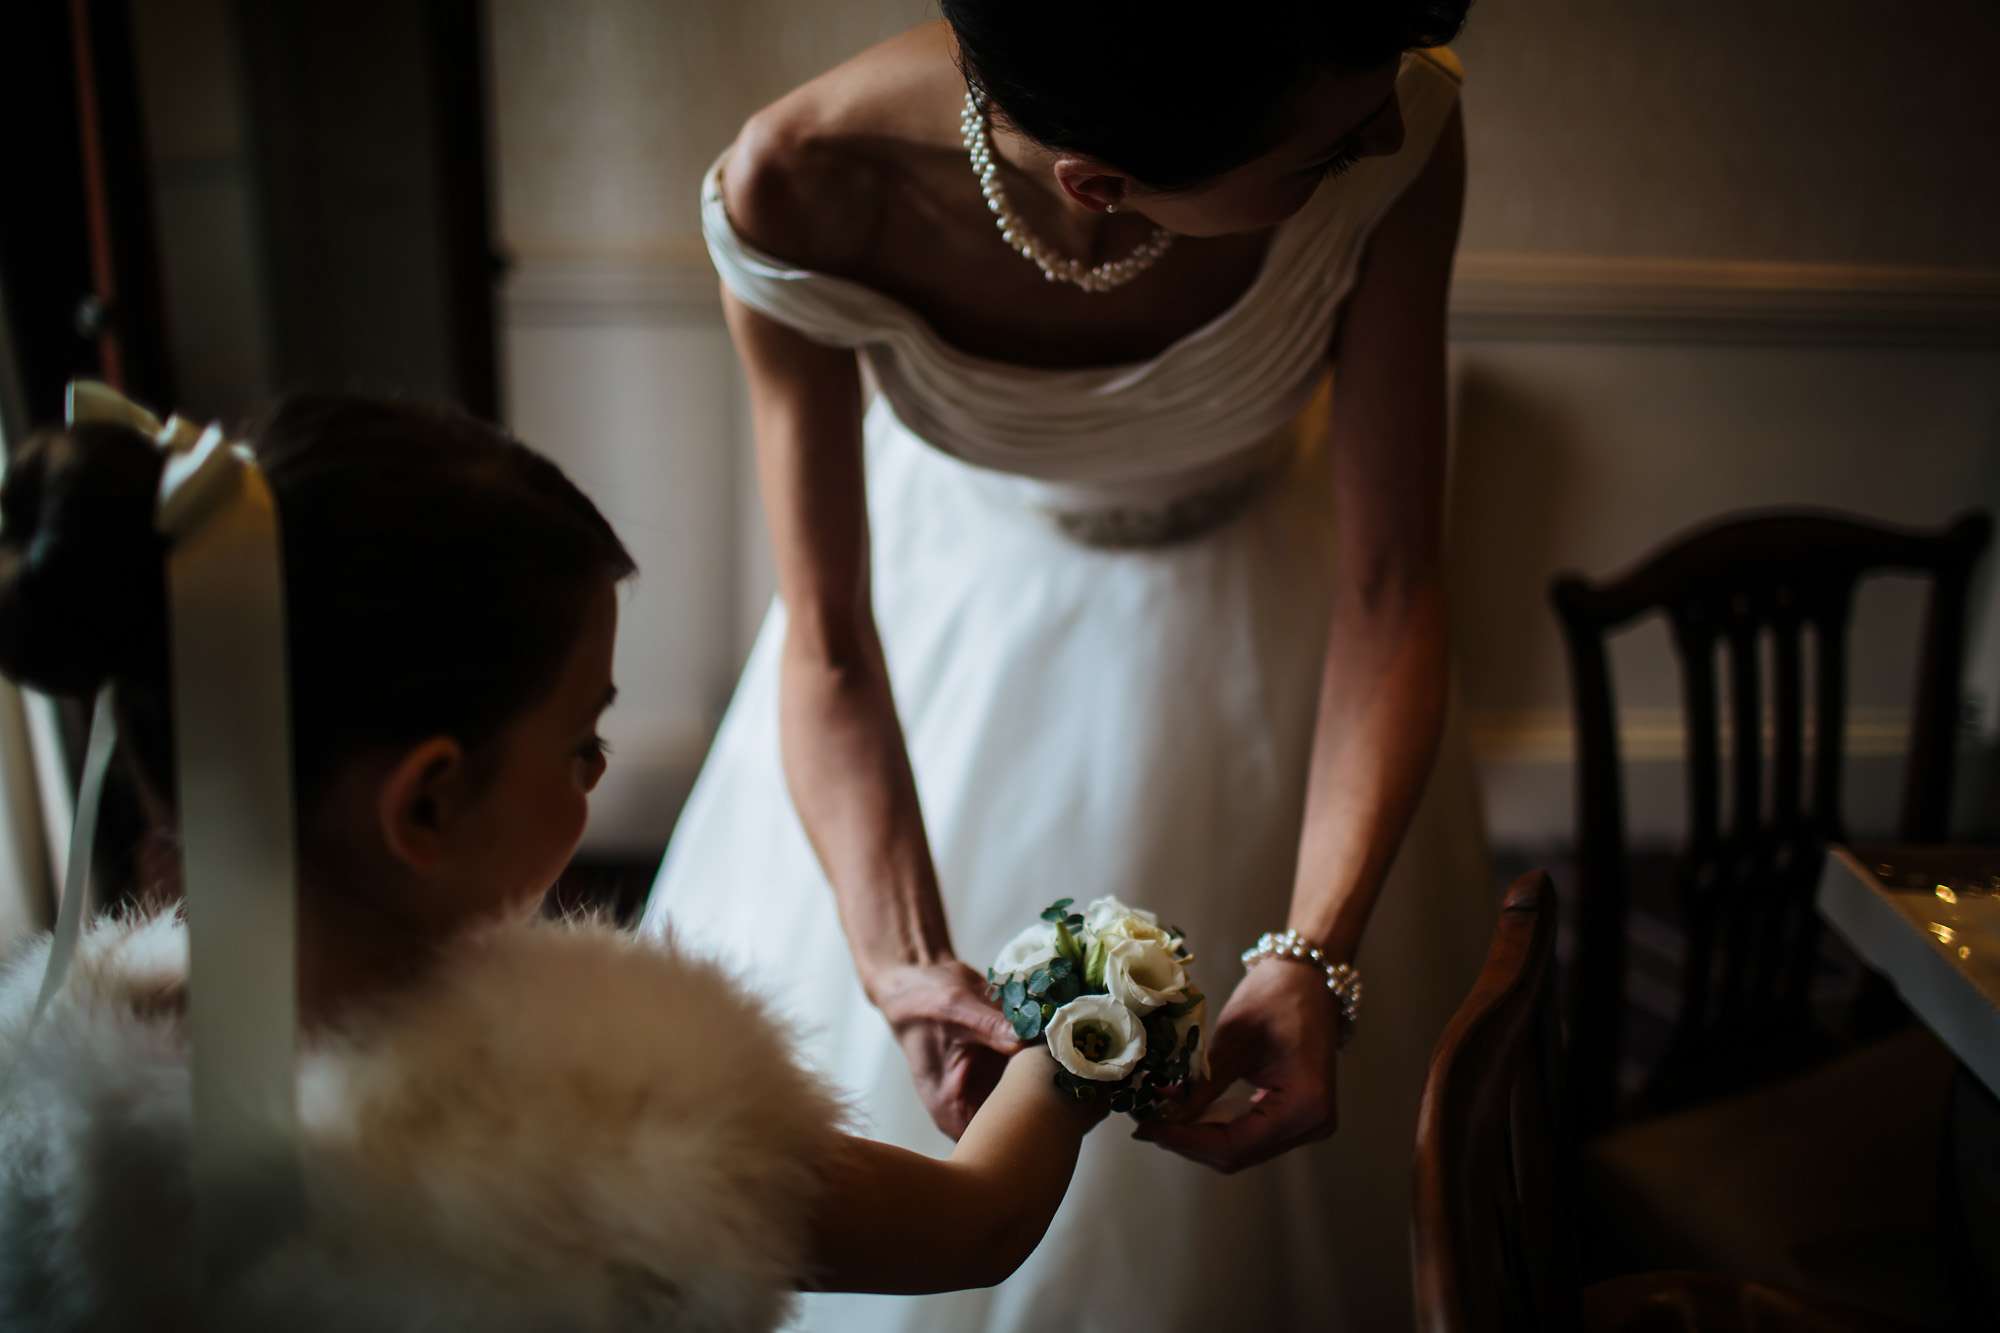 Bride attaches a flower bracelet to her daughter bridesmaid